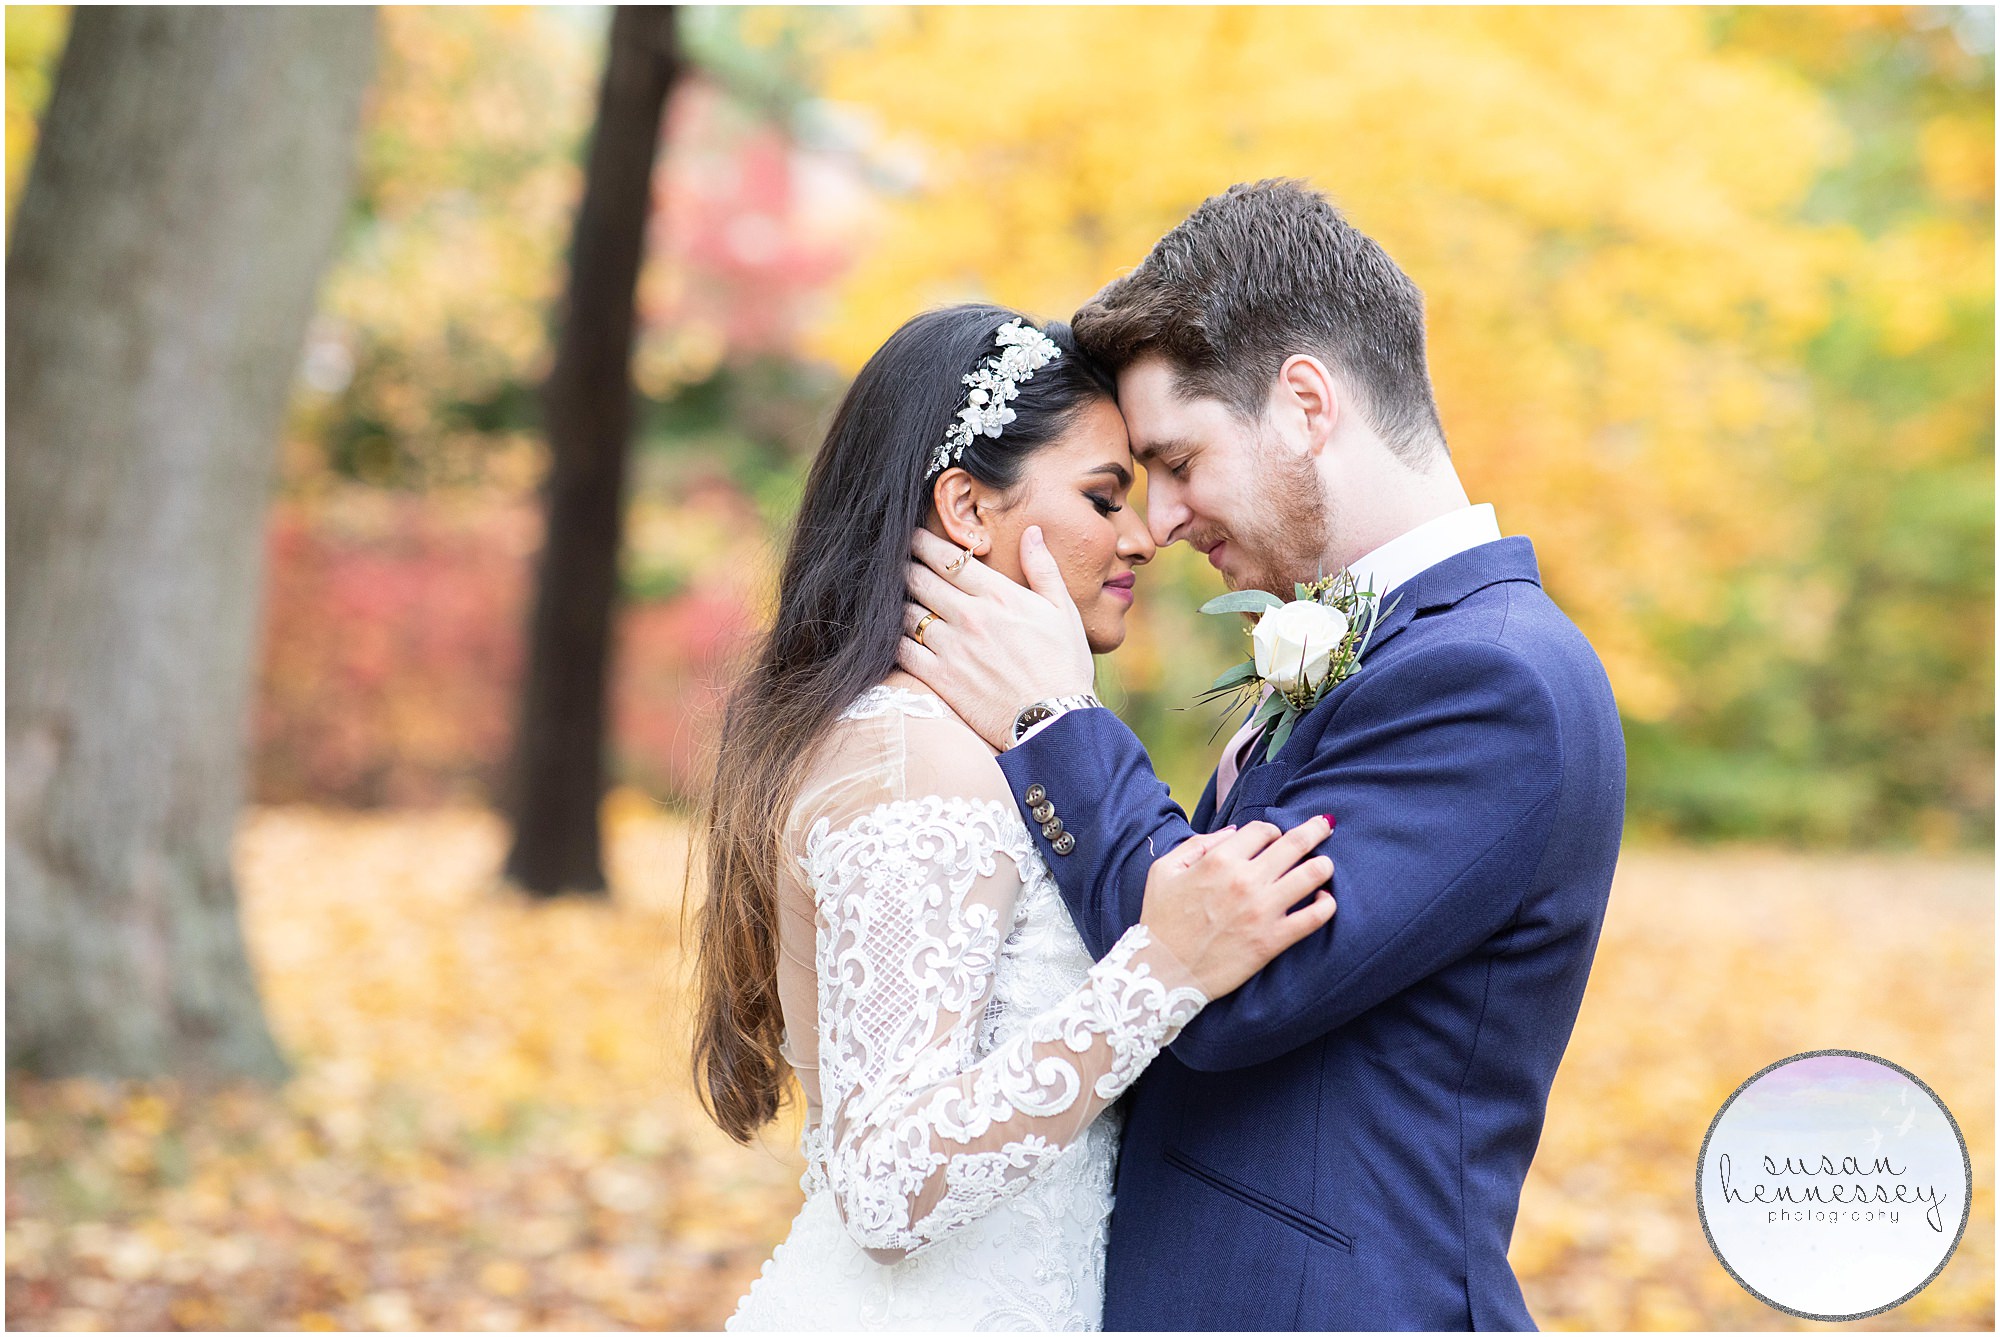 Peak Fall foliage in Moorestown at South Jersey microwedding